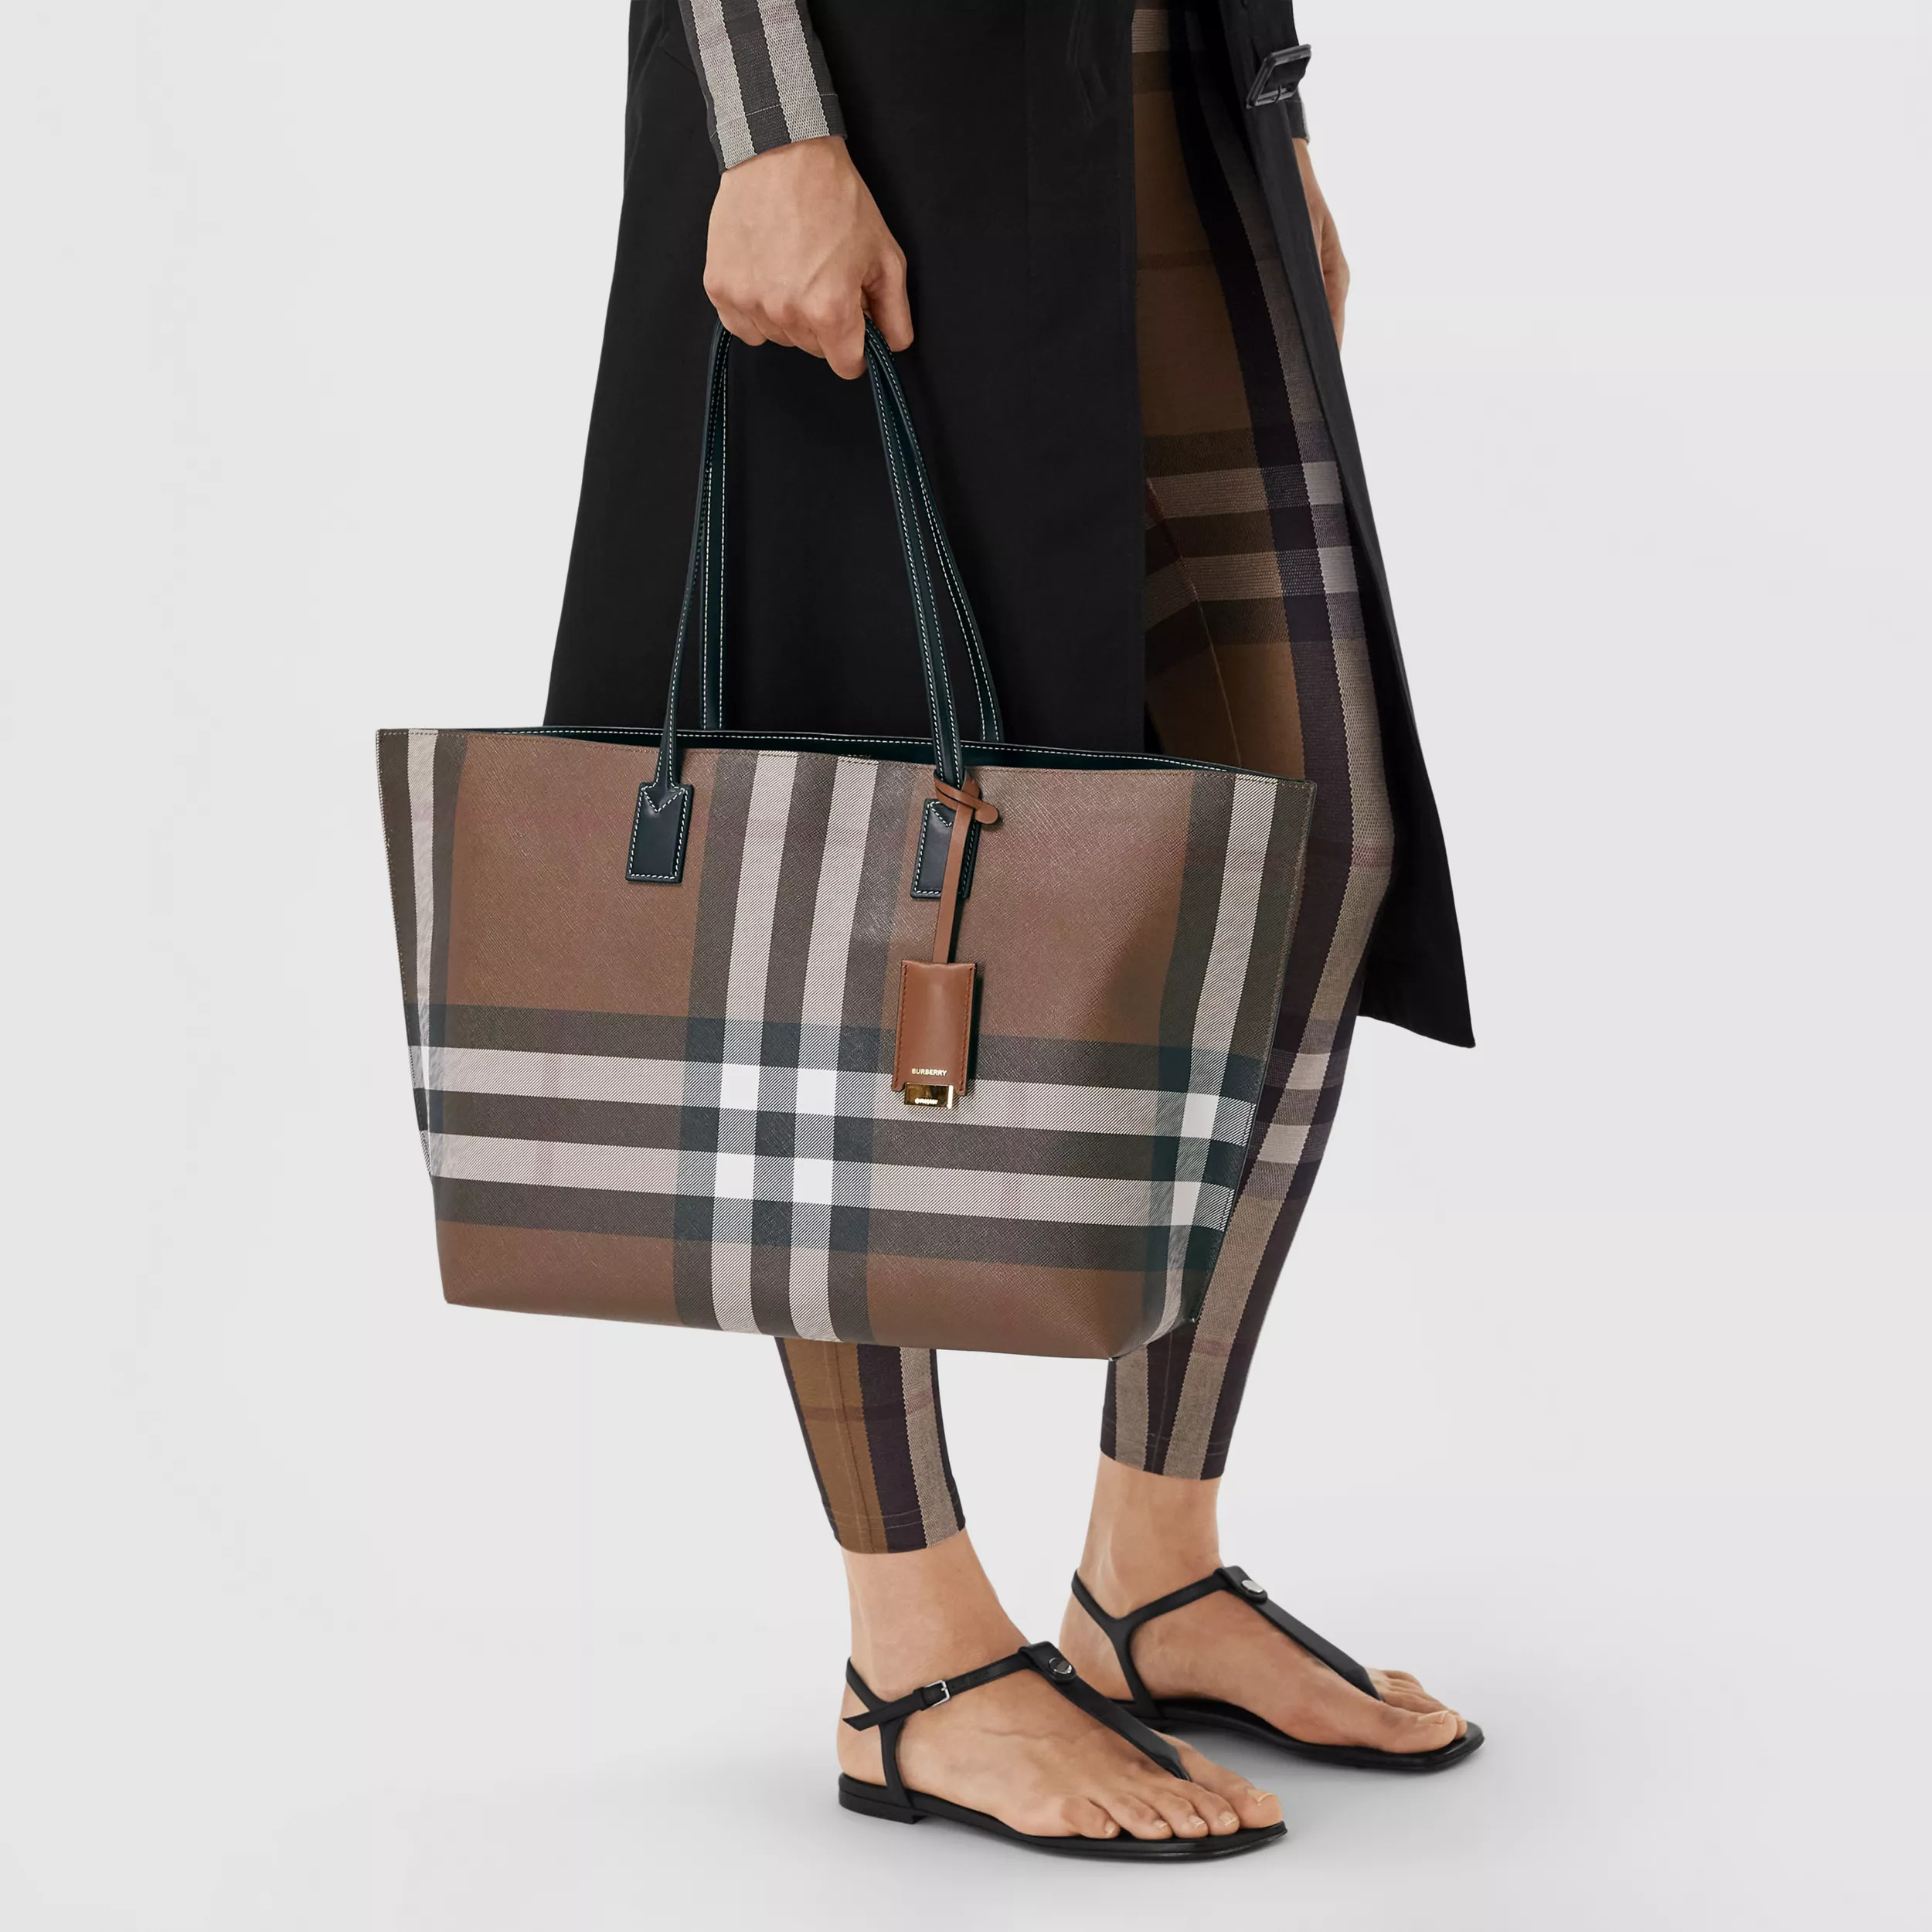 Burberry Medium Check and Leather Tote